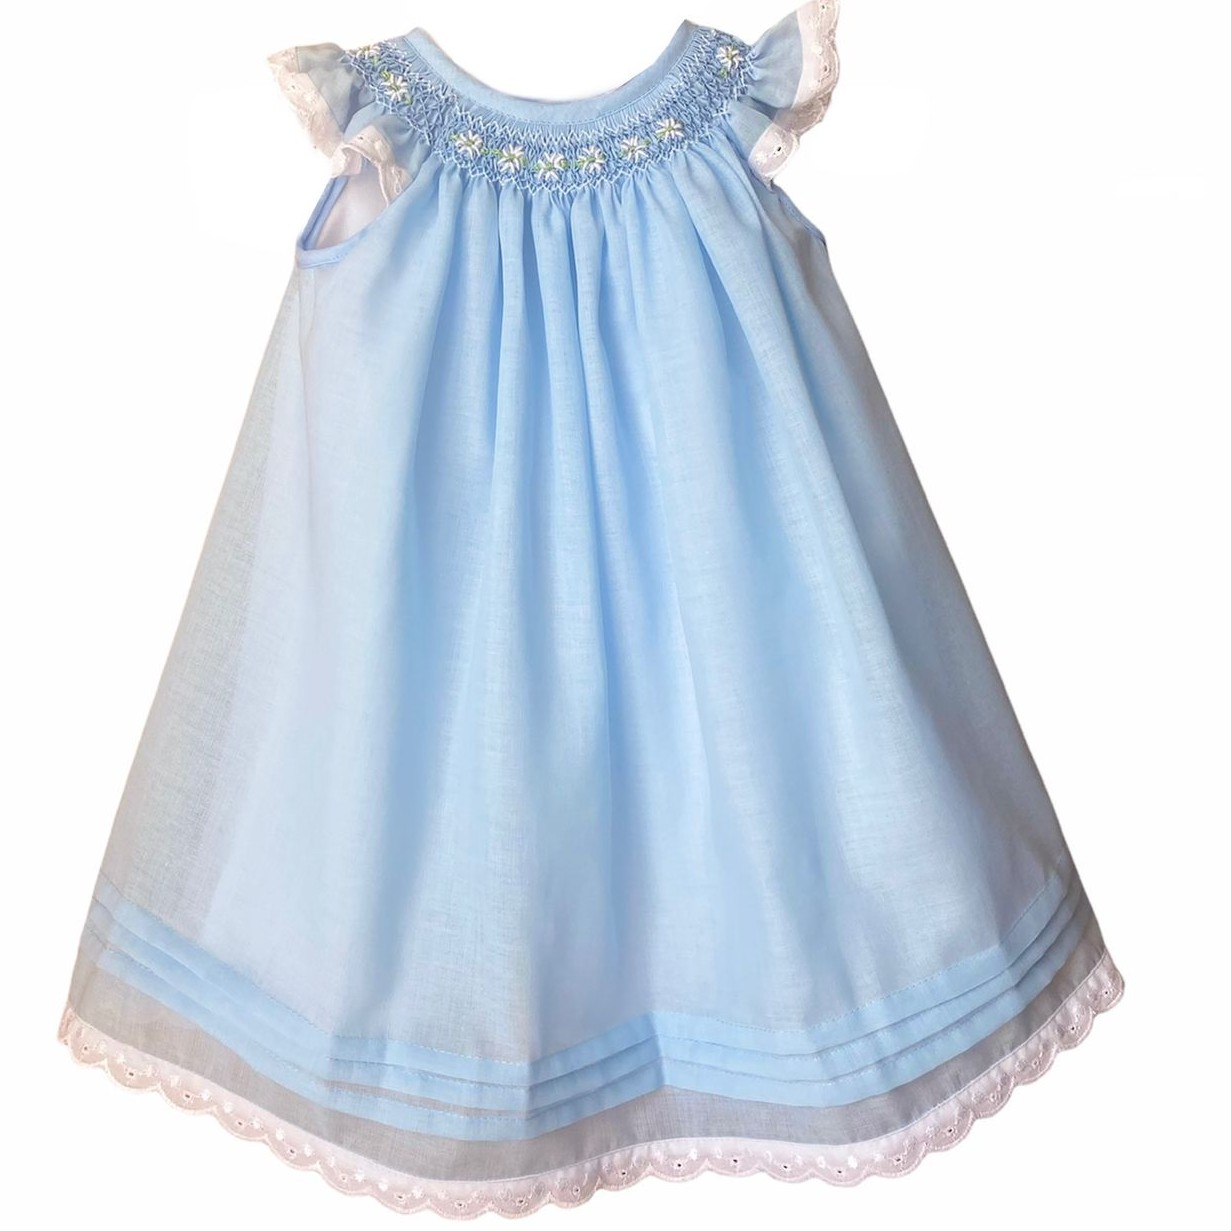 Girl's Dress with Hand Embroidery - Sky Blue Color with White Embroidery